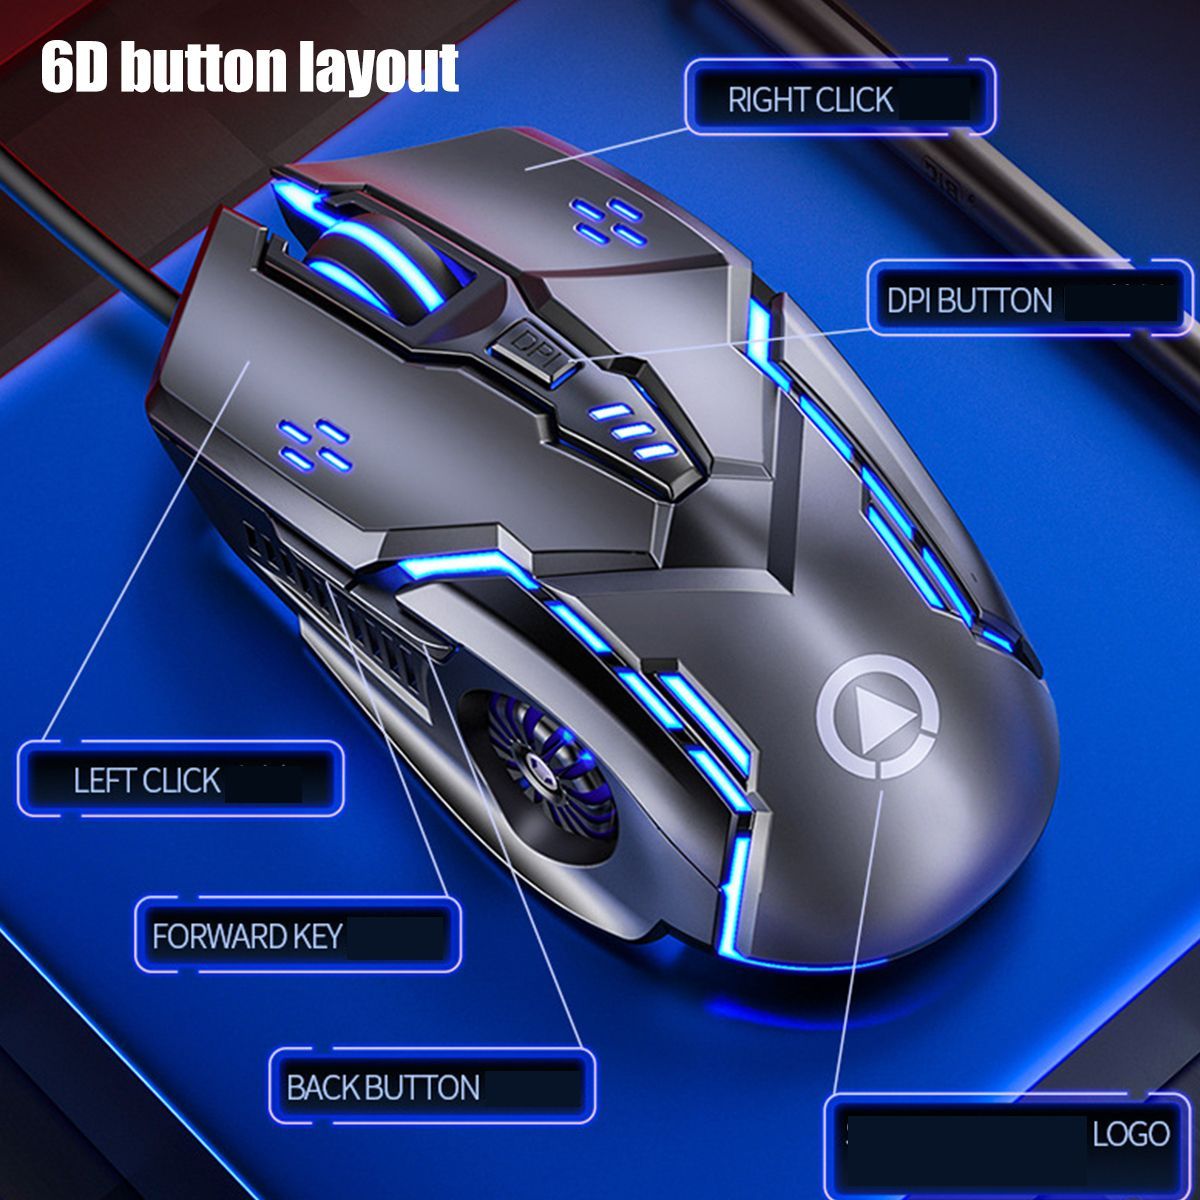 YINDIAO-G5-Wired-Gaming-Mouse-6D-3200DPI-RGB-Gaming-Mouse-Computer-Laptop-Optical-Game-Mouse-1742891